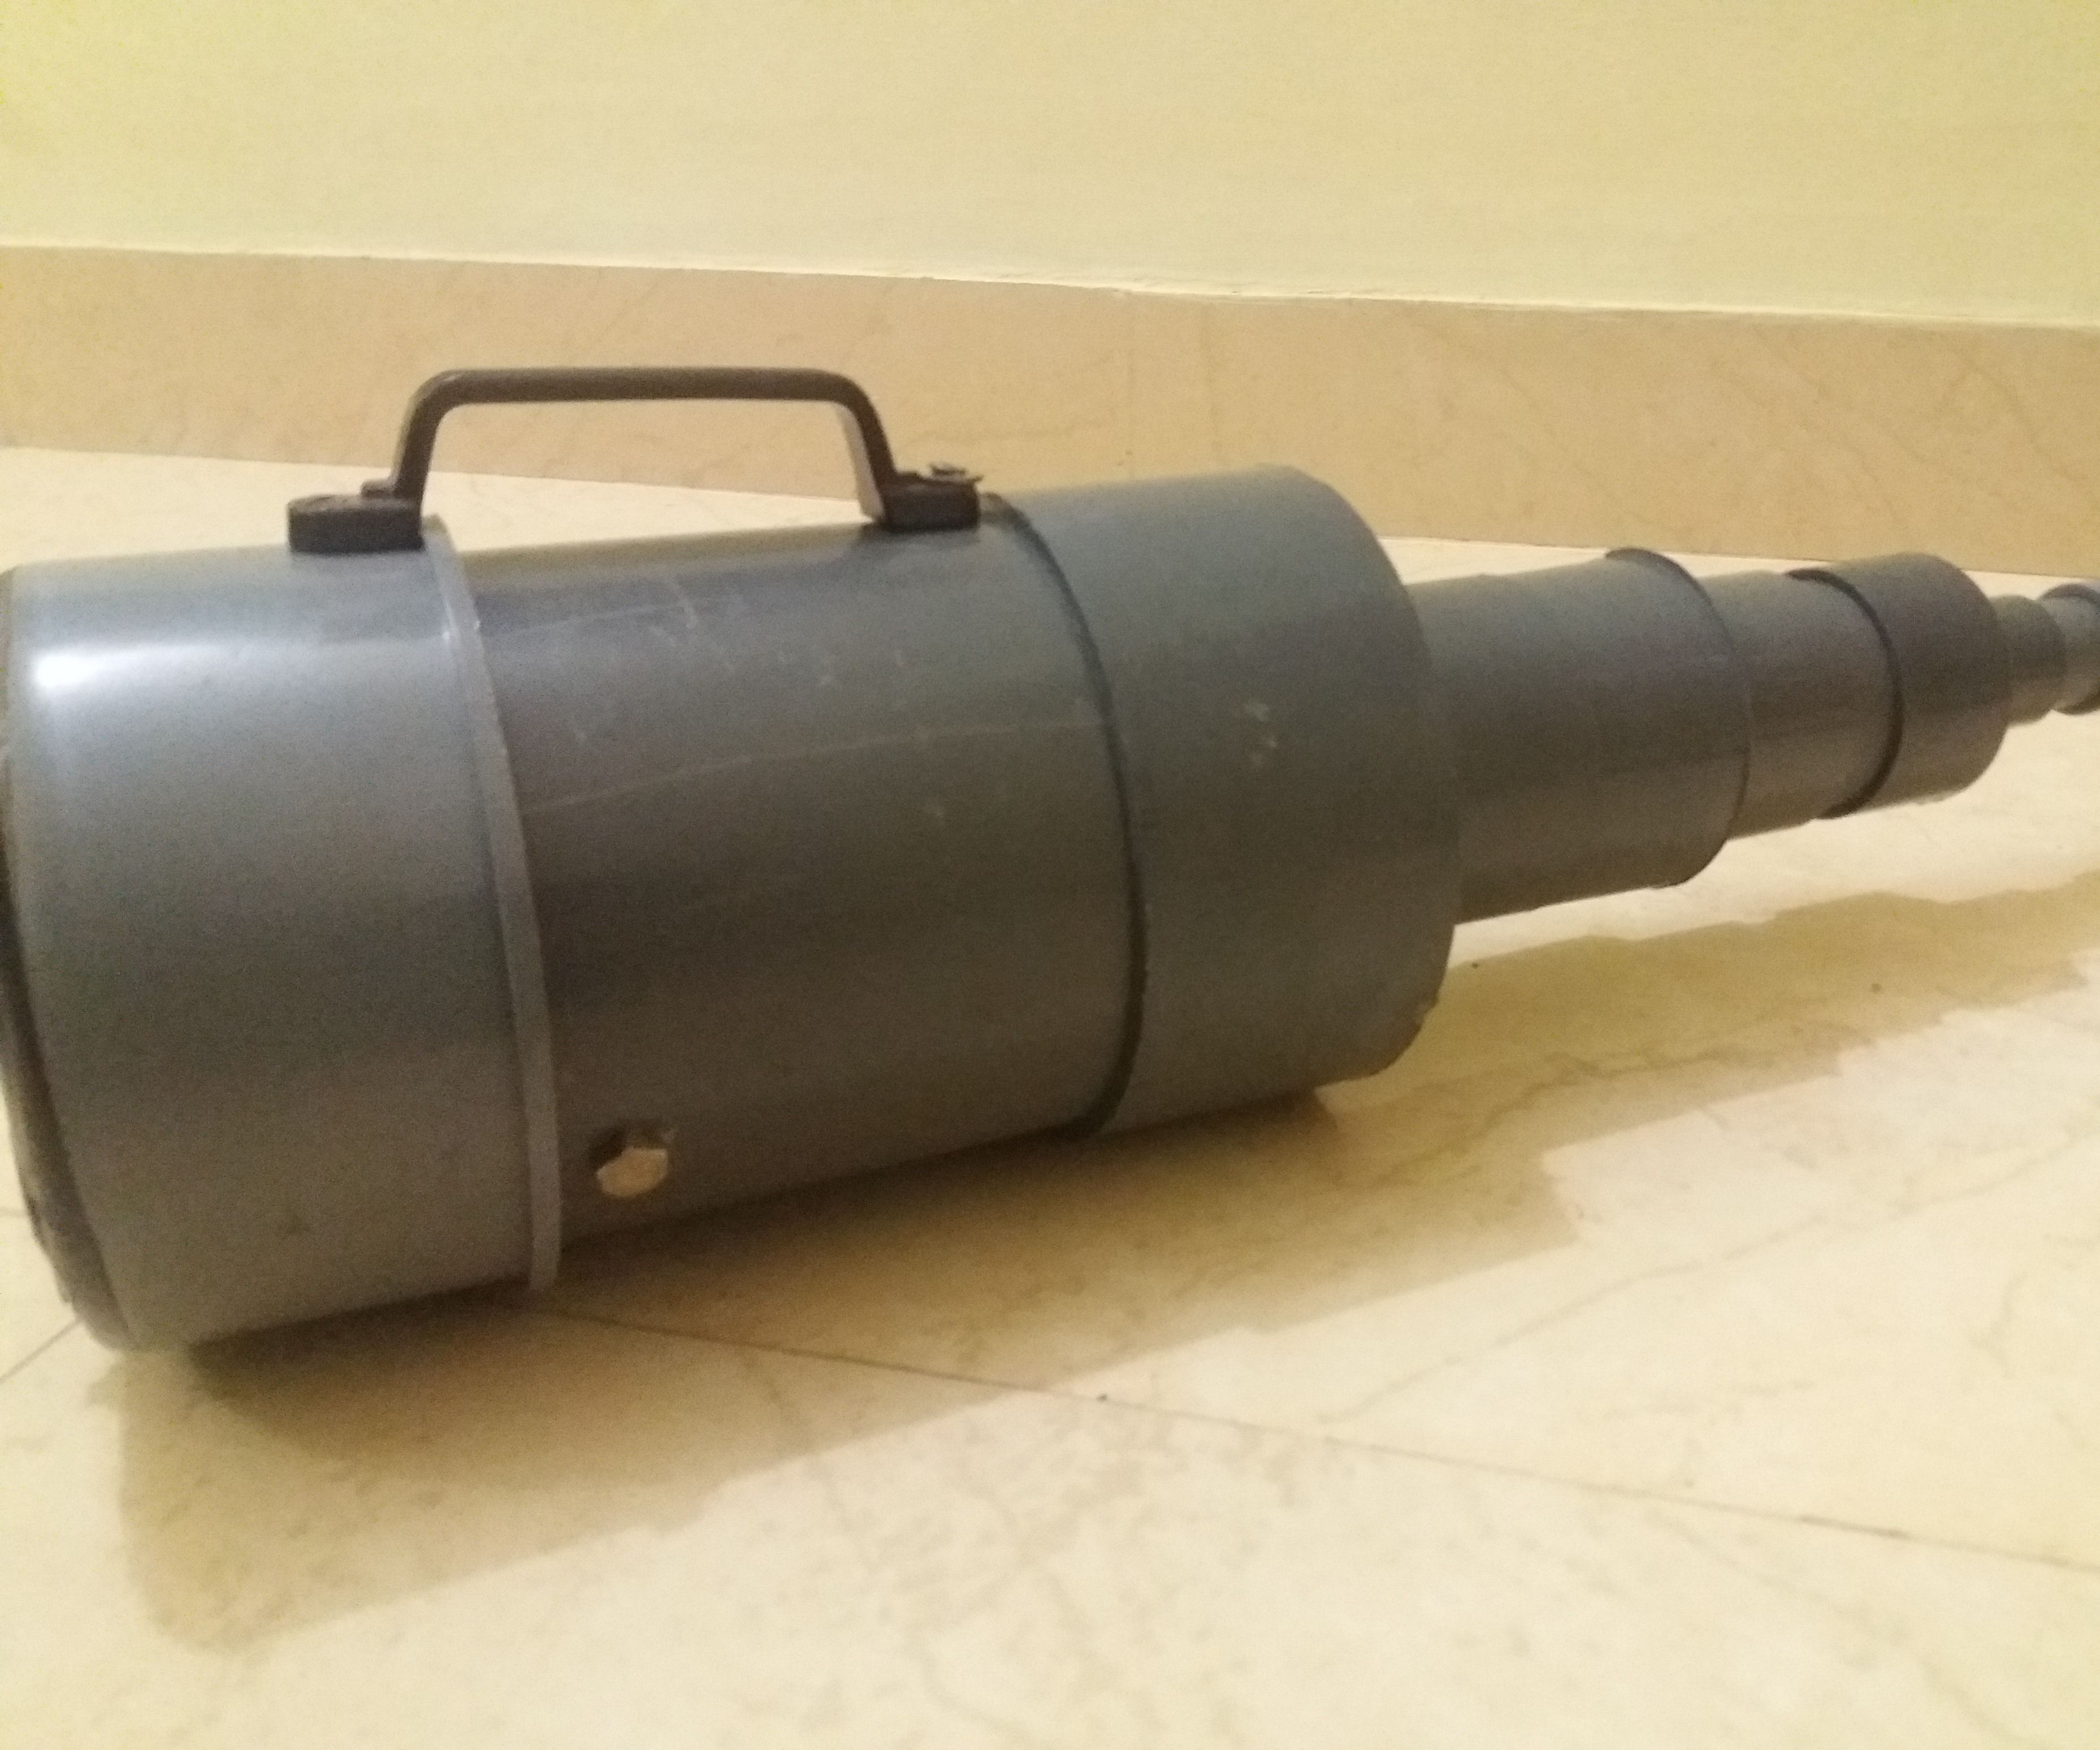 Diy Vacuum Cleaner Out of Pvc